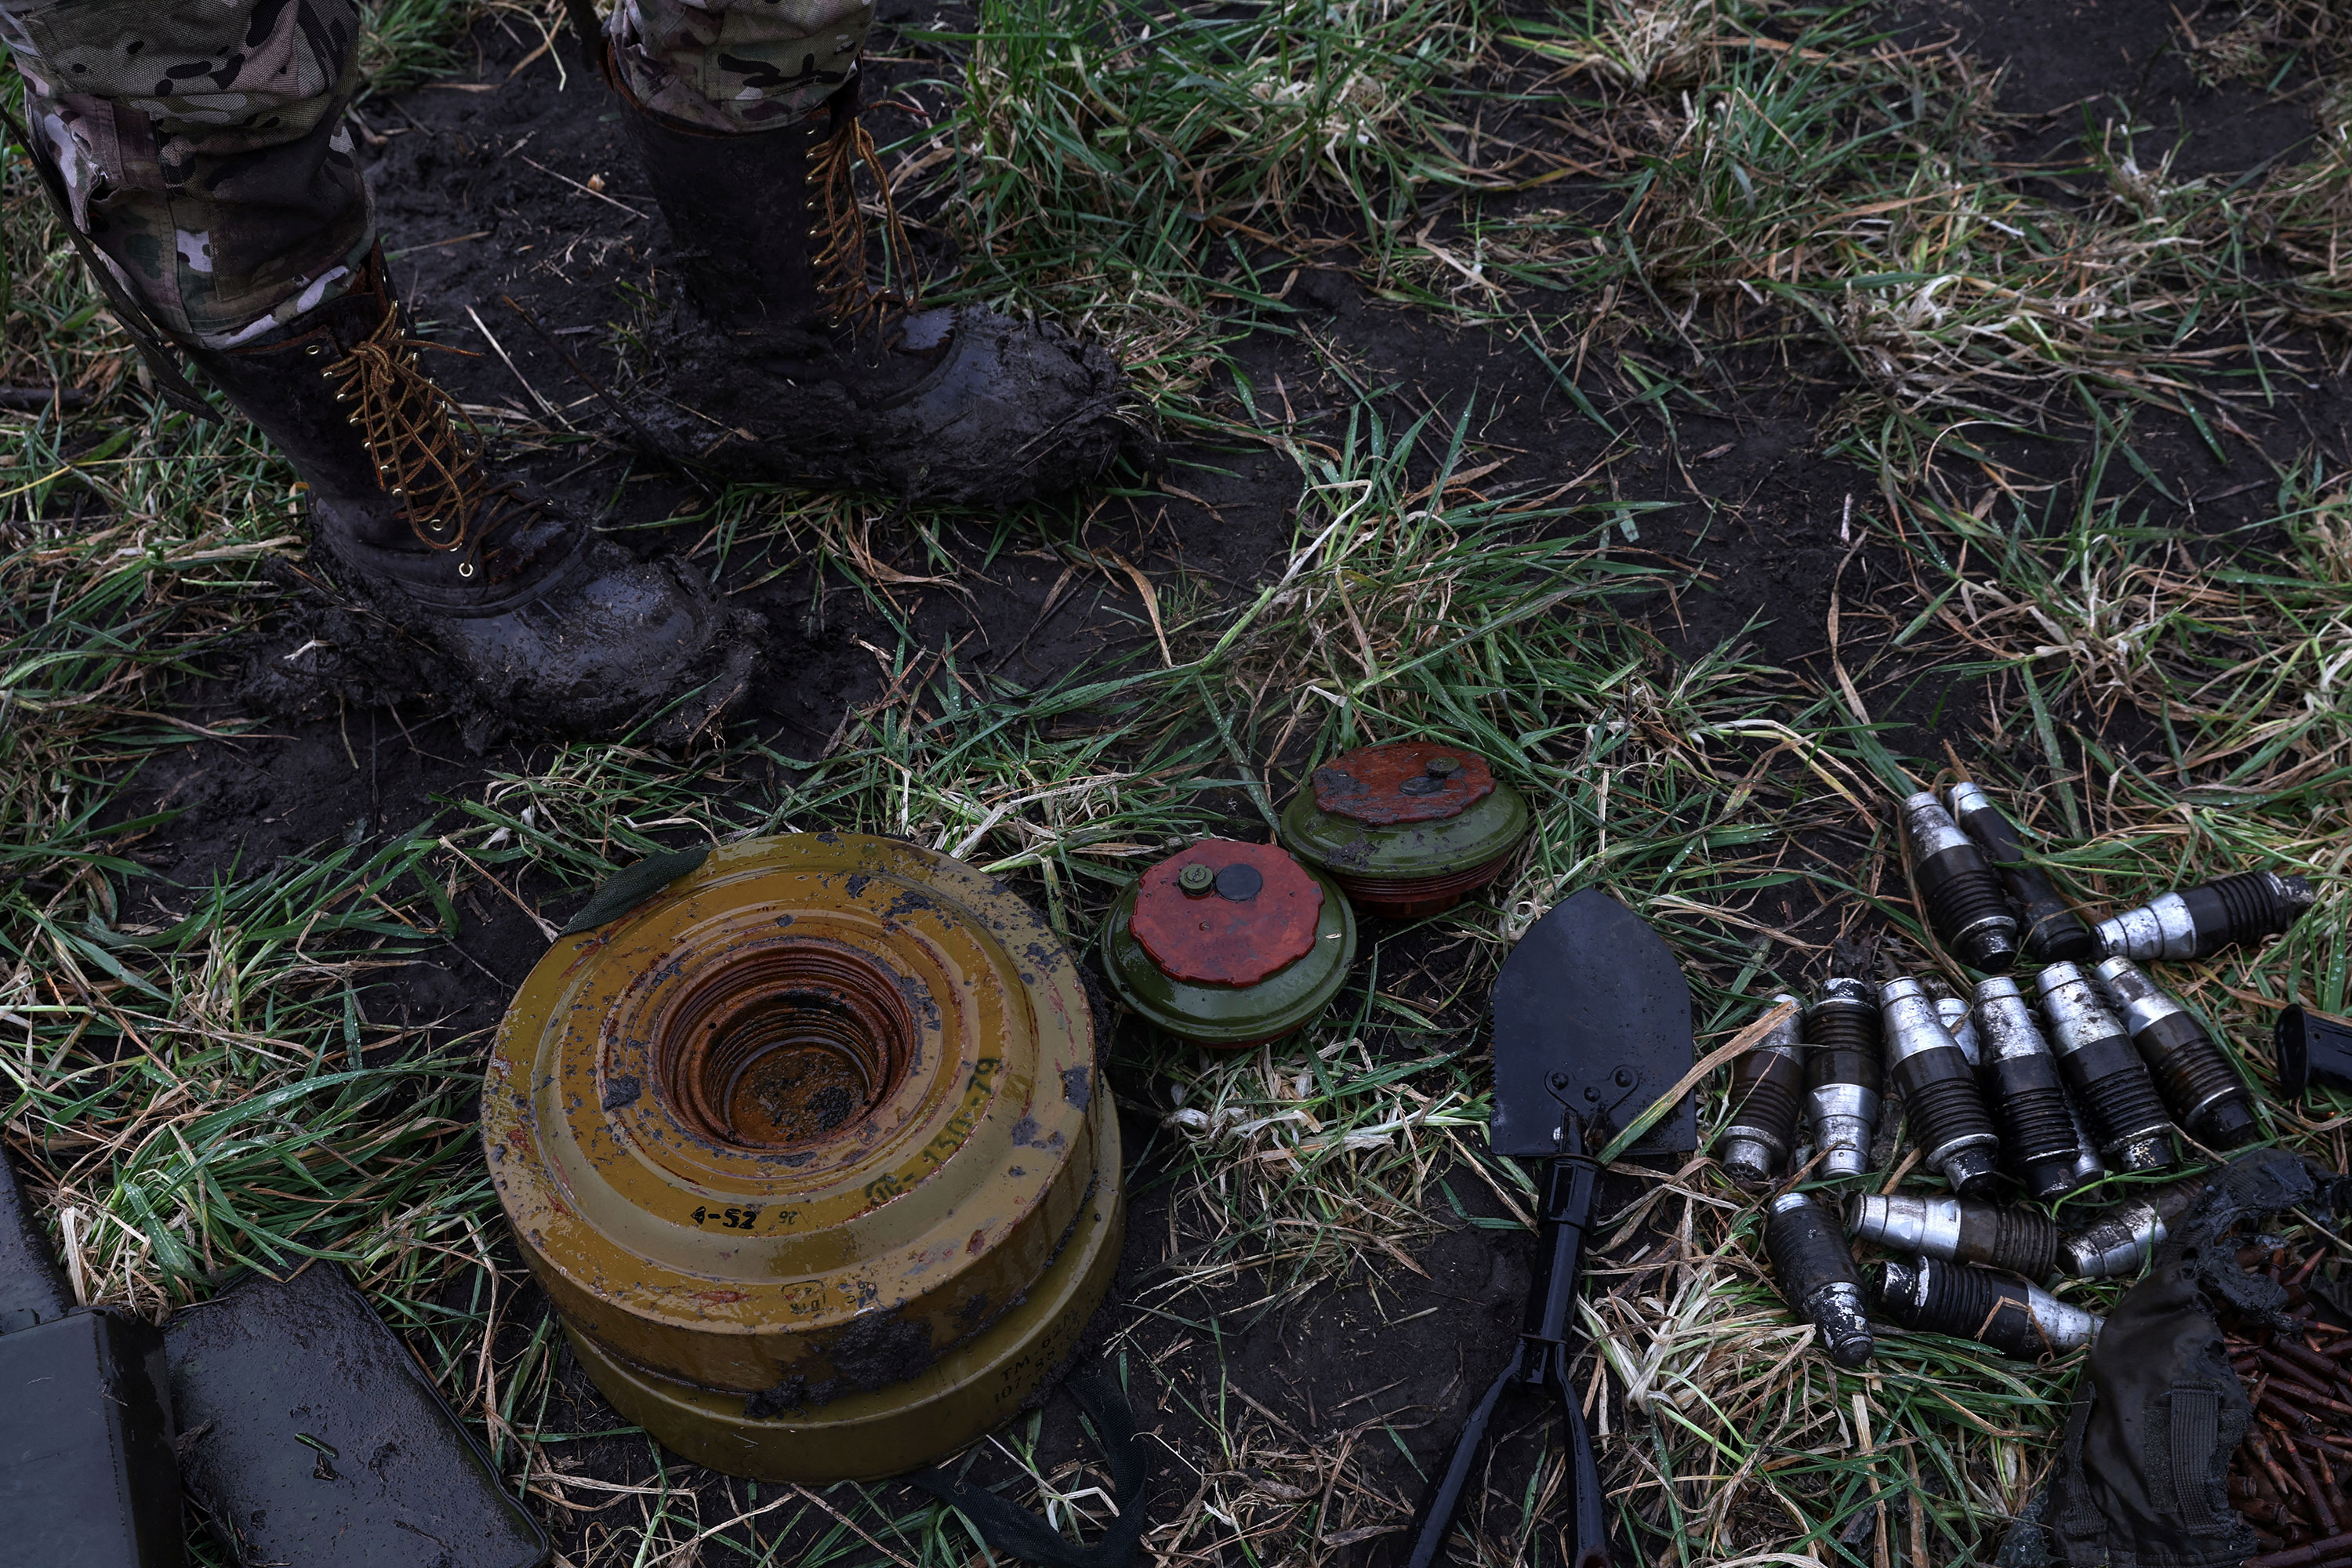 Remains of mines gathered by the Ukrainian National Guard sit in the grass in the Donetsk region of Ukraine on December 12.